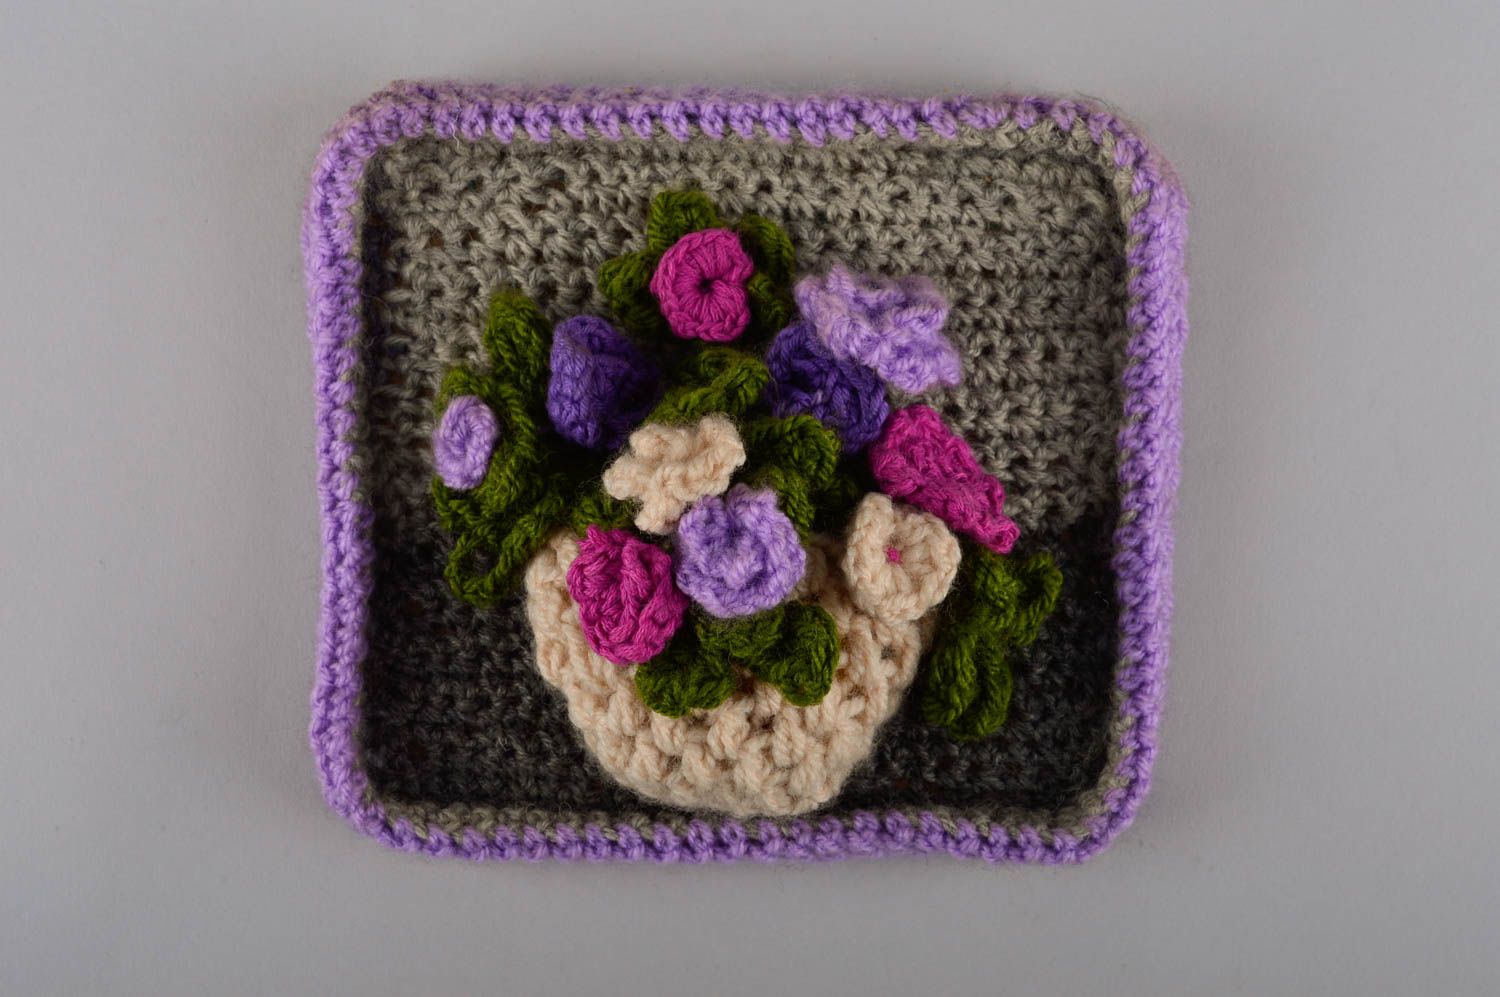 Handmade wall picture with flowers crocheted wall panel interior decor ideas photo 2